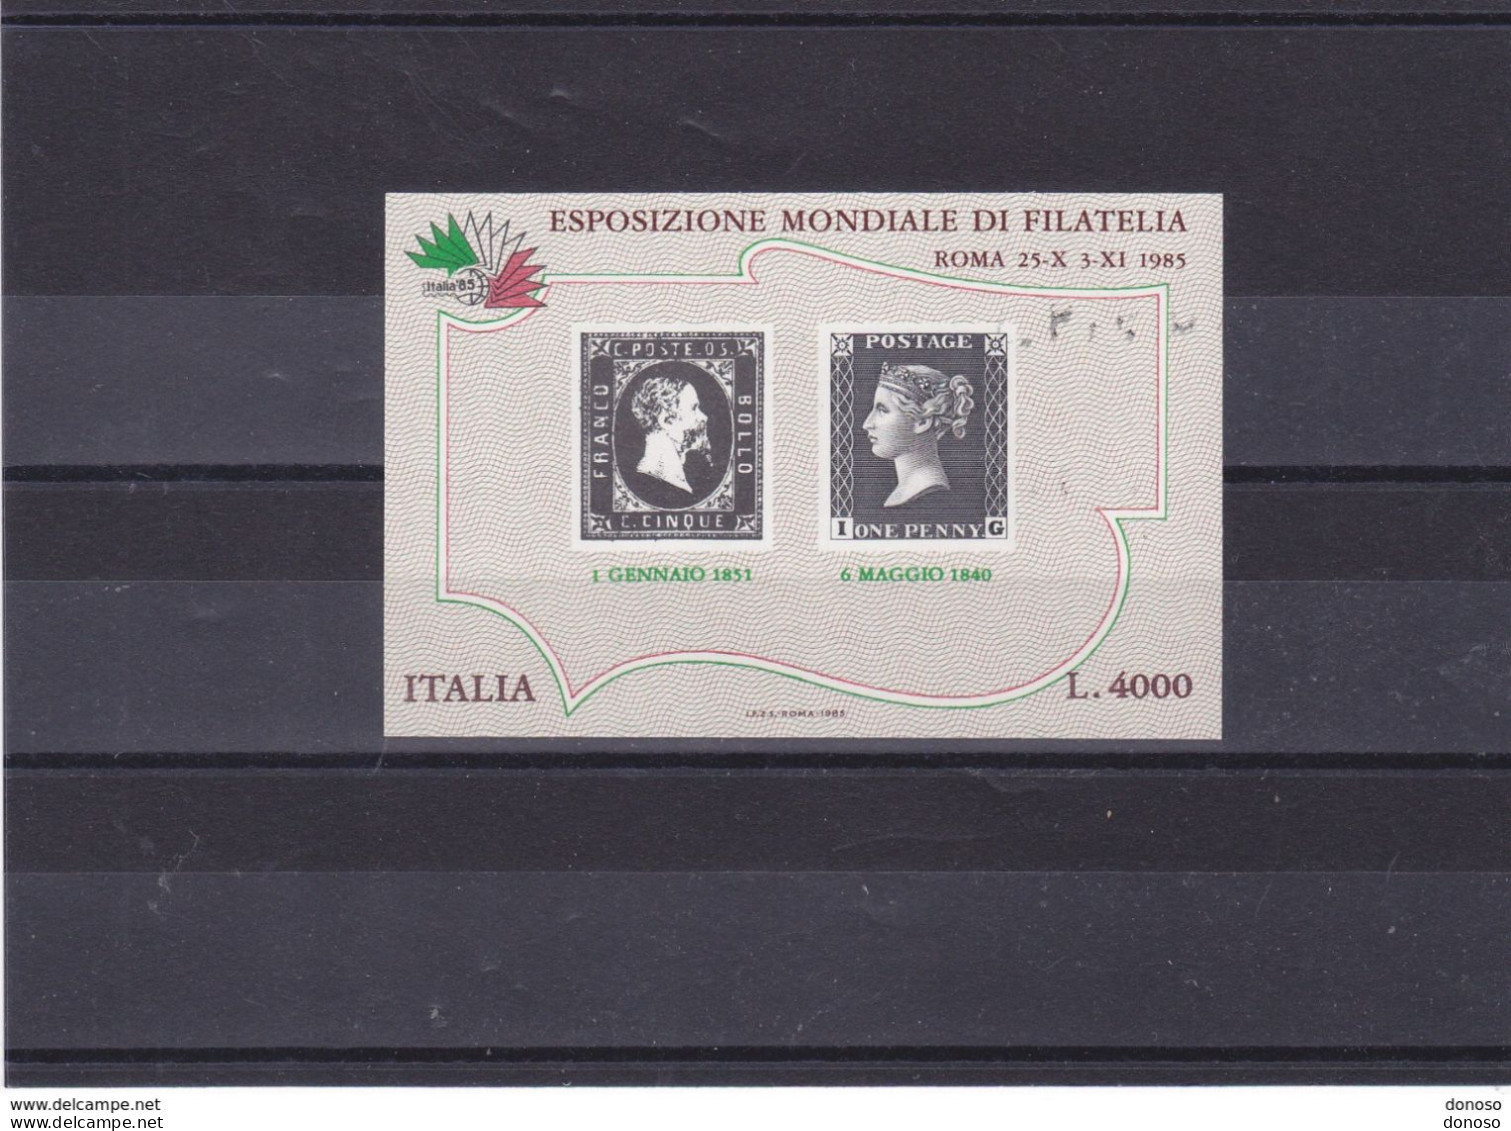 ITALIE 1985 TIMBRES SUR TIMBRES ITALIA 85 Yvert BF 3, Michel Bl 1 NEUF** MNH Cote Yv: 8 Euros - 1981-90: Mint/hinged